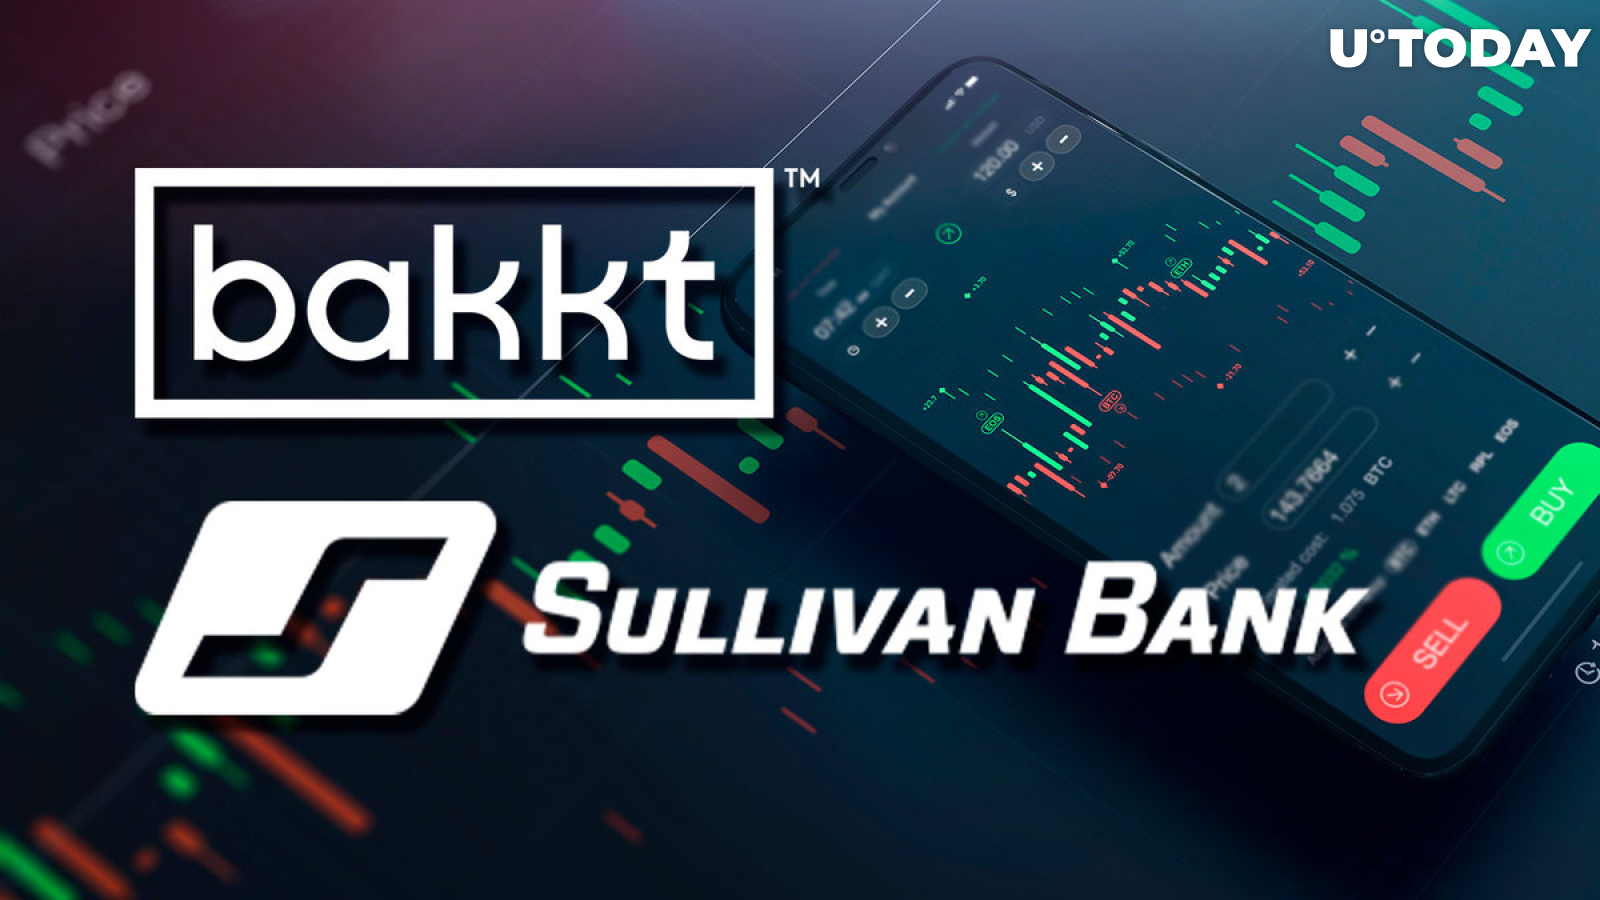 Bakkt and Sullivan Bank Join Forces to Provide Crypto Trading to Clients